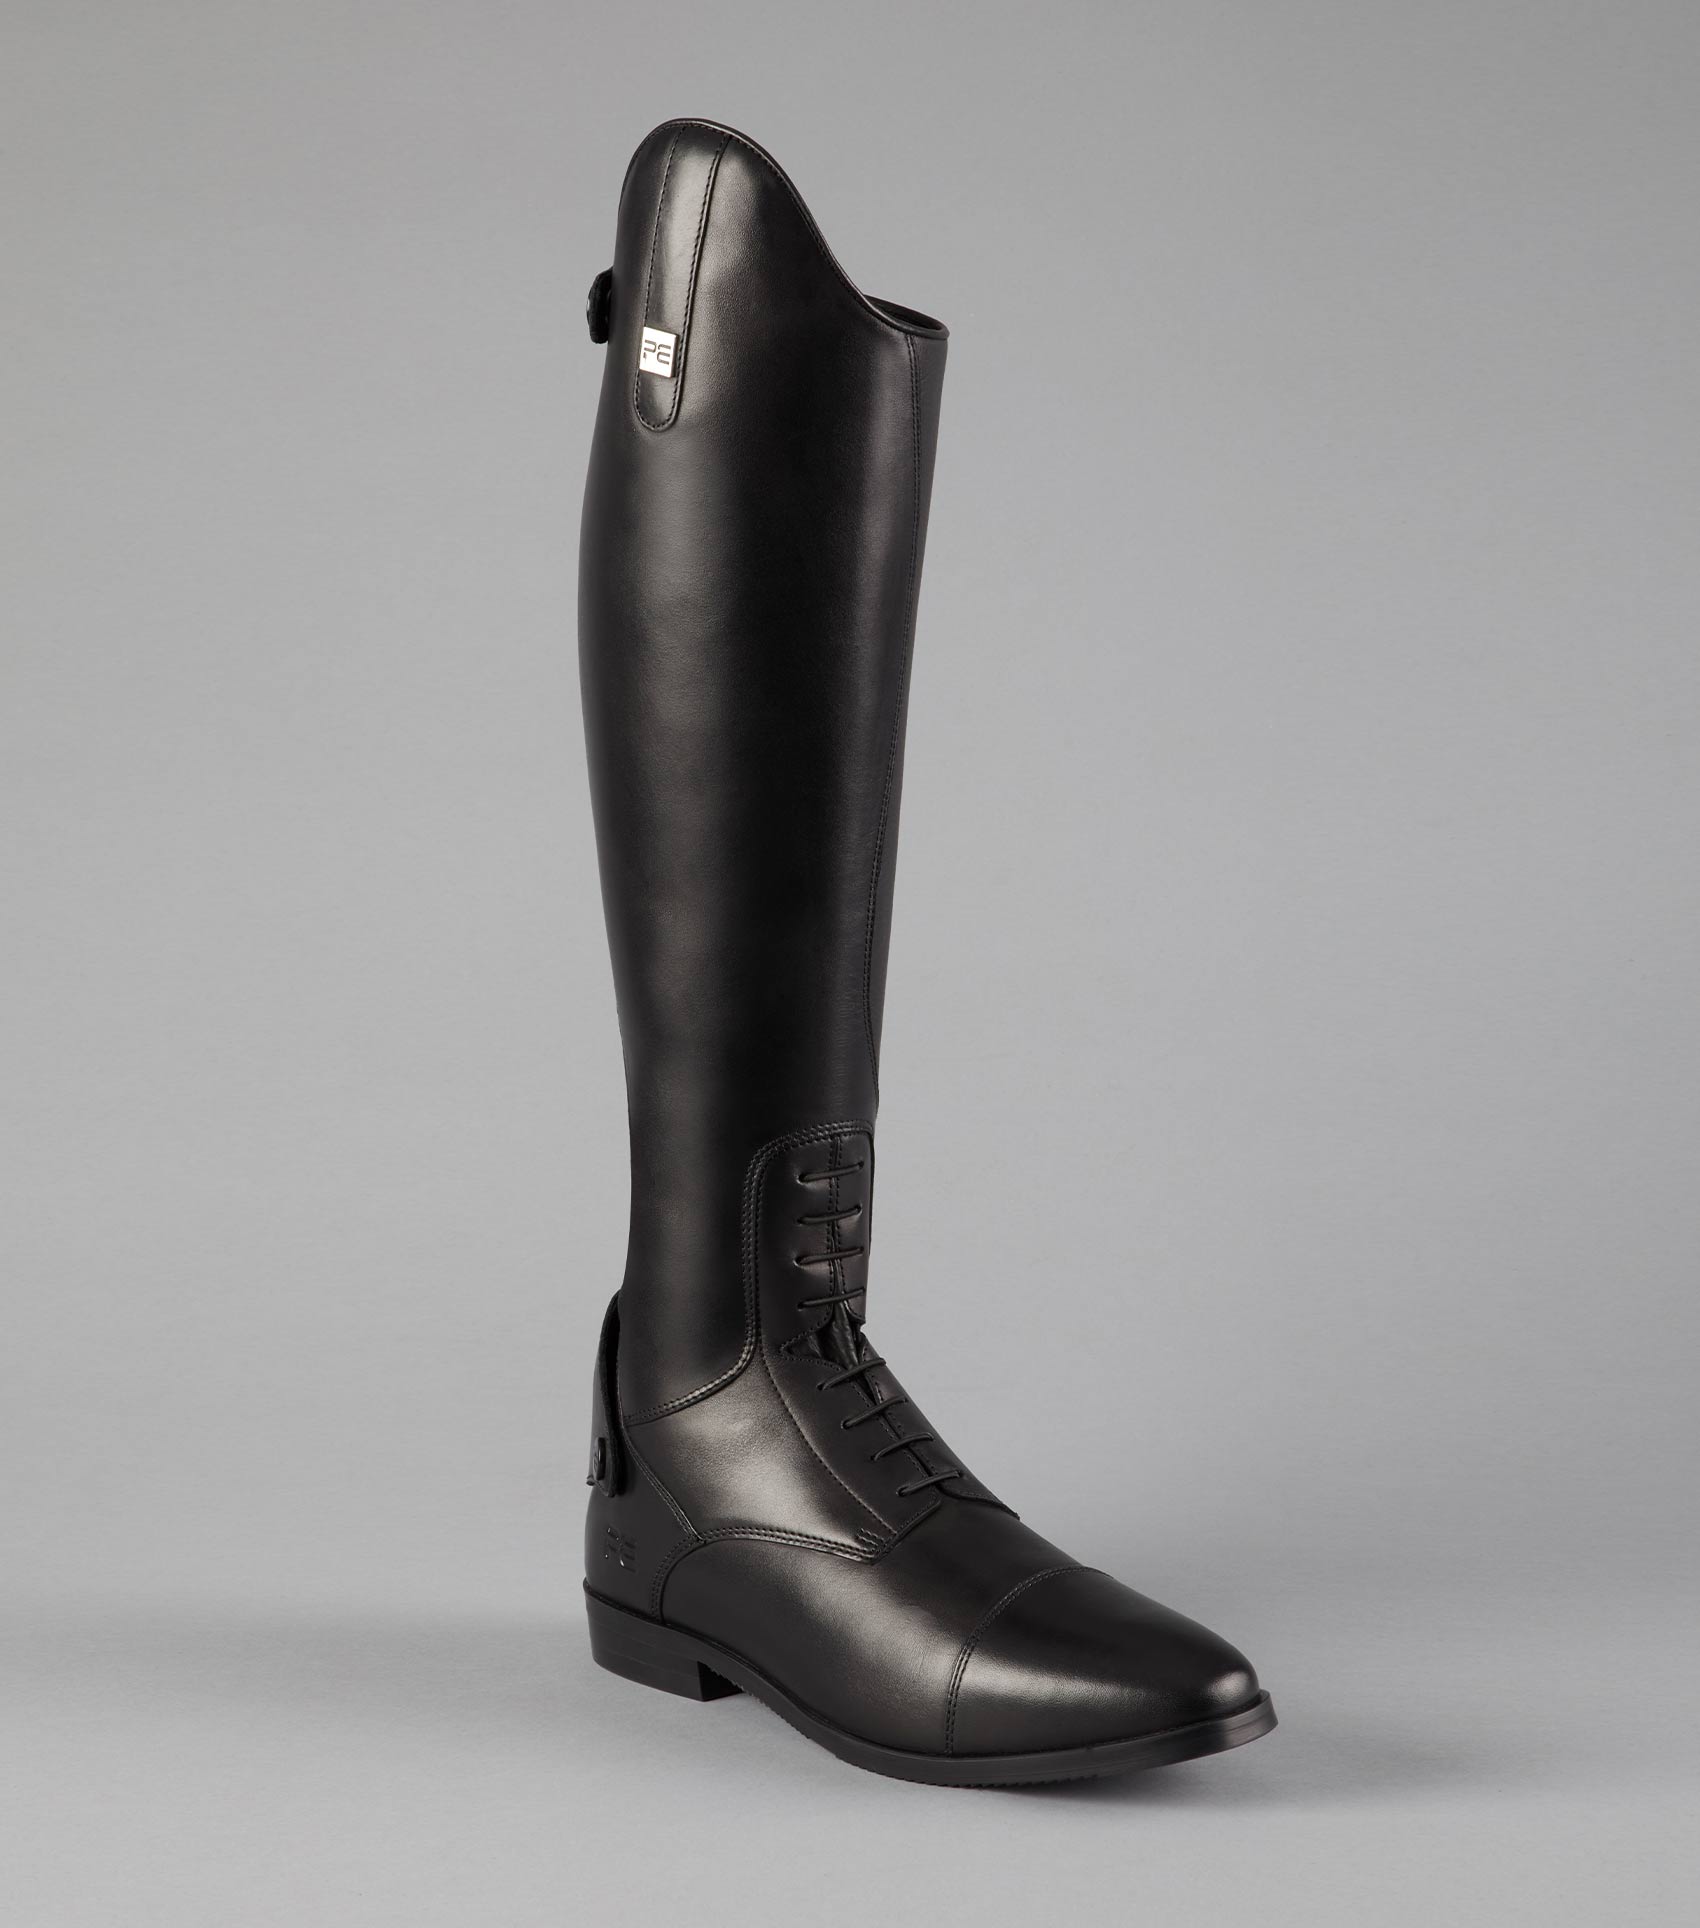 Botero Mens Tall Leather Field Boot- Black – Premier Equine Int. Ltd.